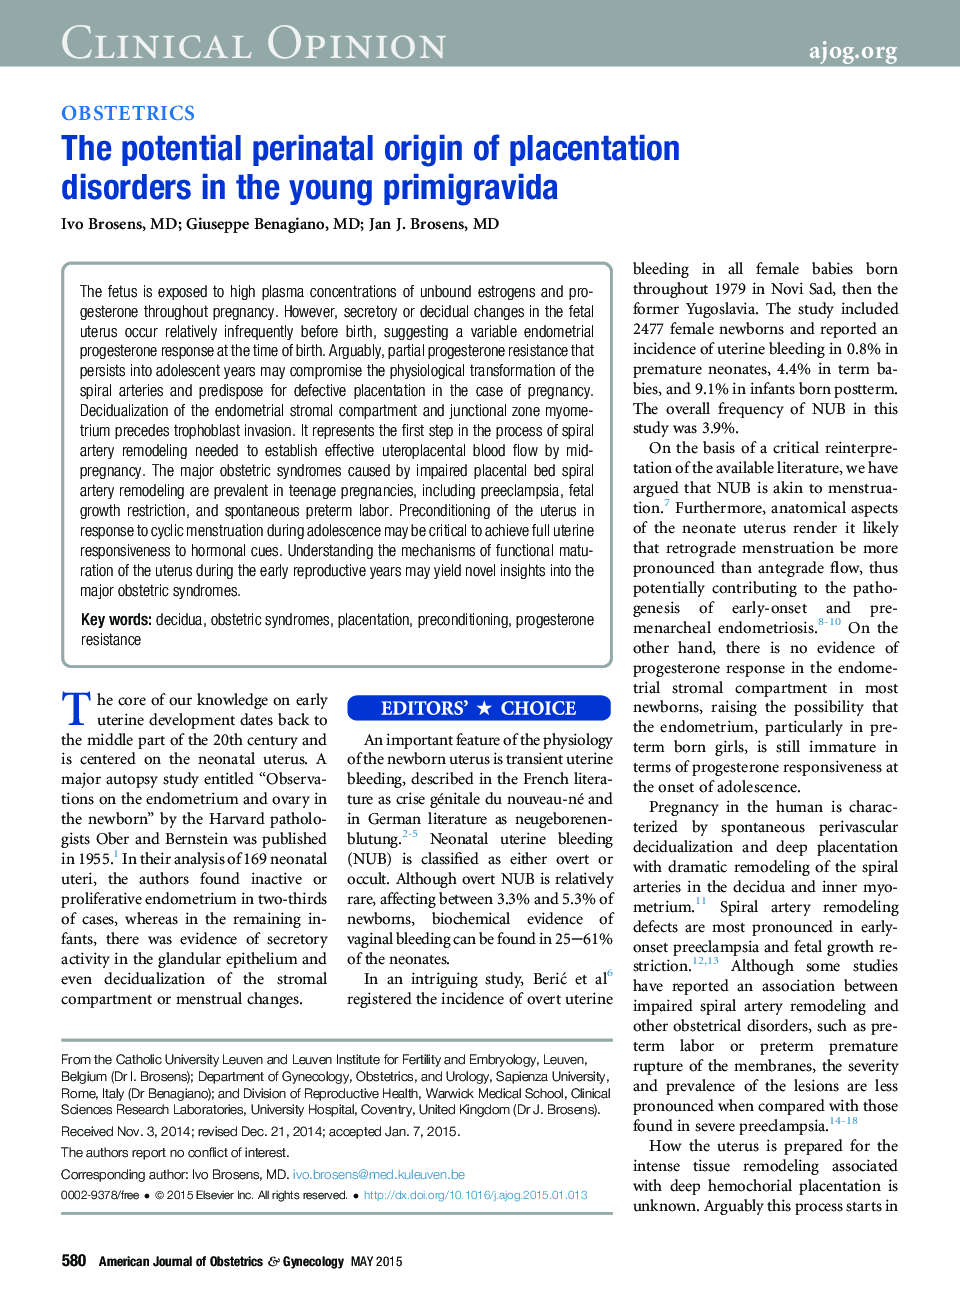 The potential perinatal origin of placentation disorders in the young primigravida 